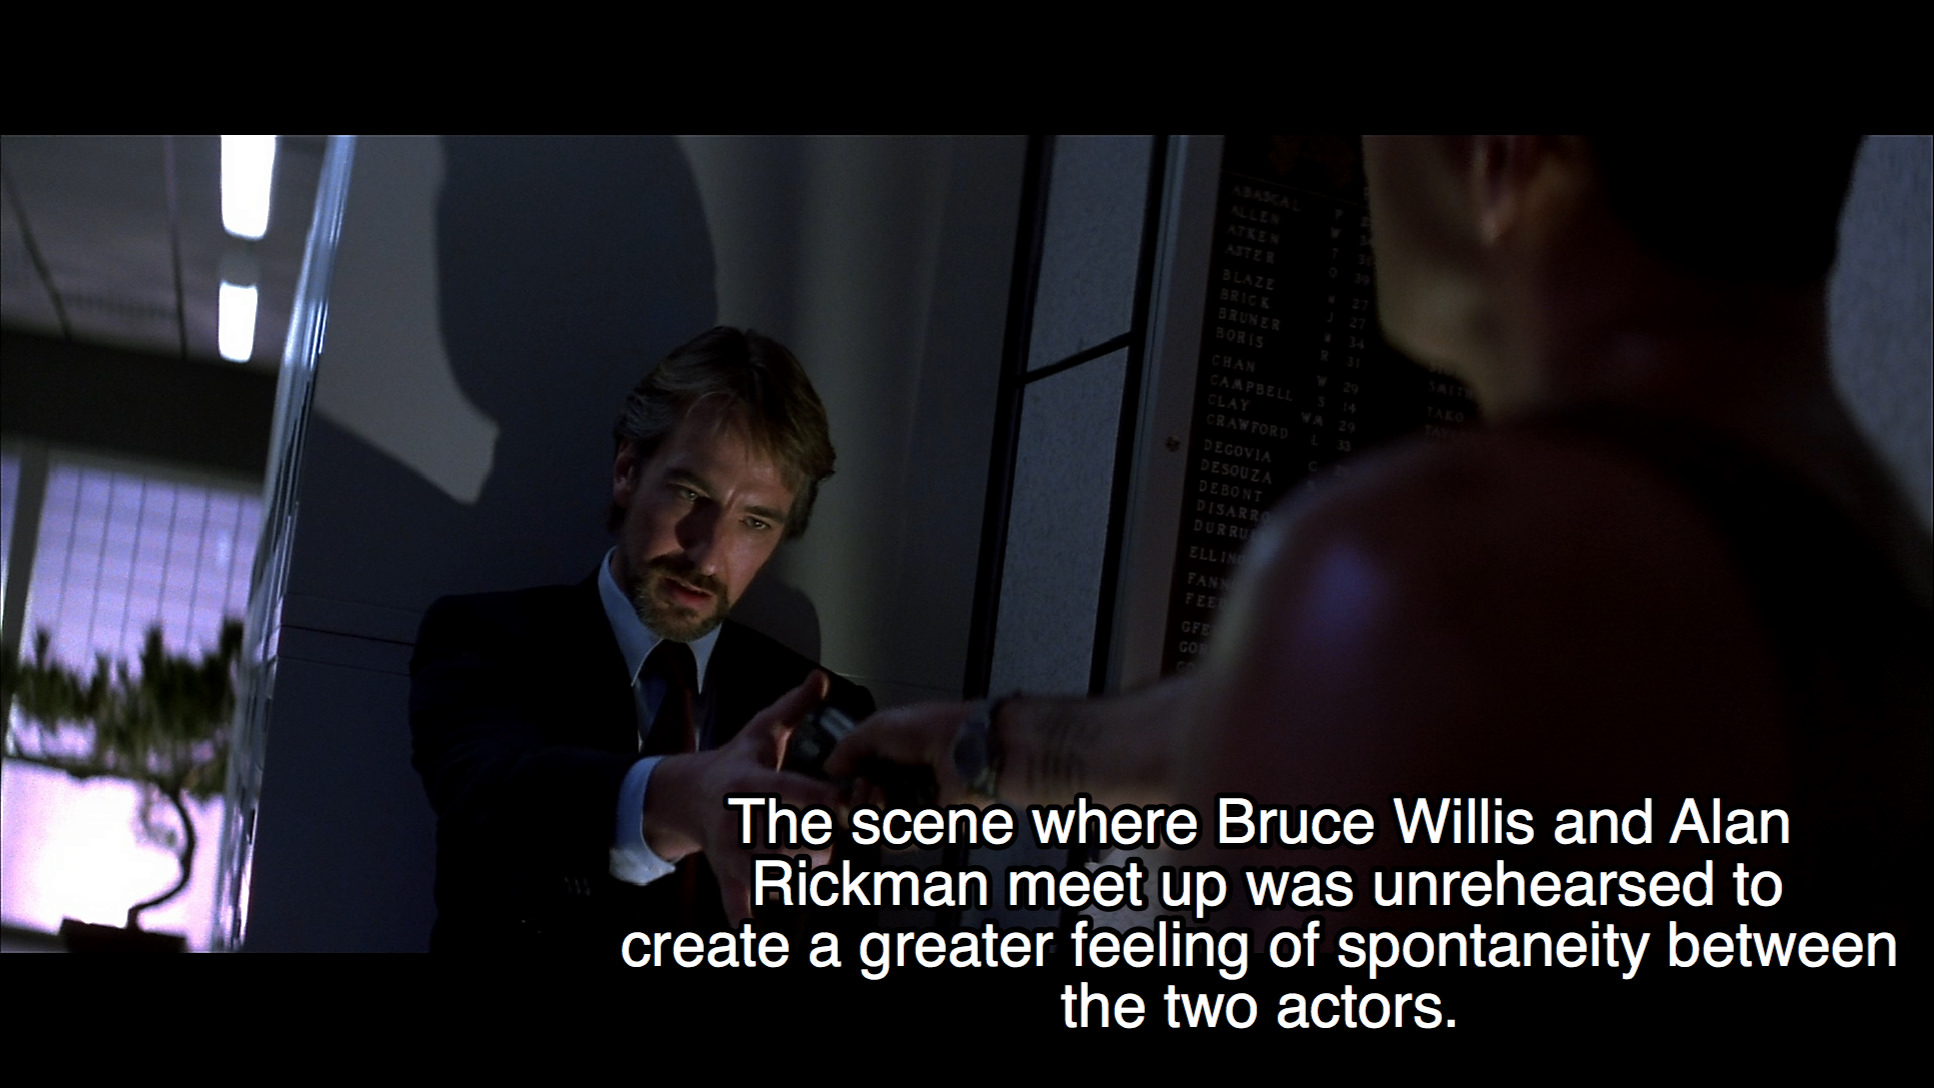 Die Hard - The scene where Bruce Willis and Alan Rickman meet up was unrehearsed to create a greater feeling of spontaneity between the two actors.